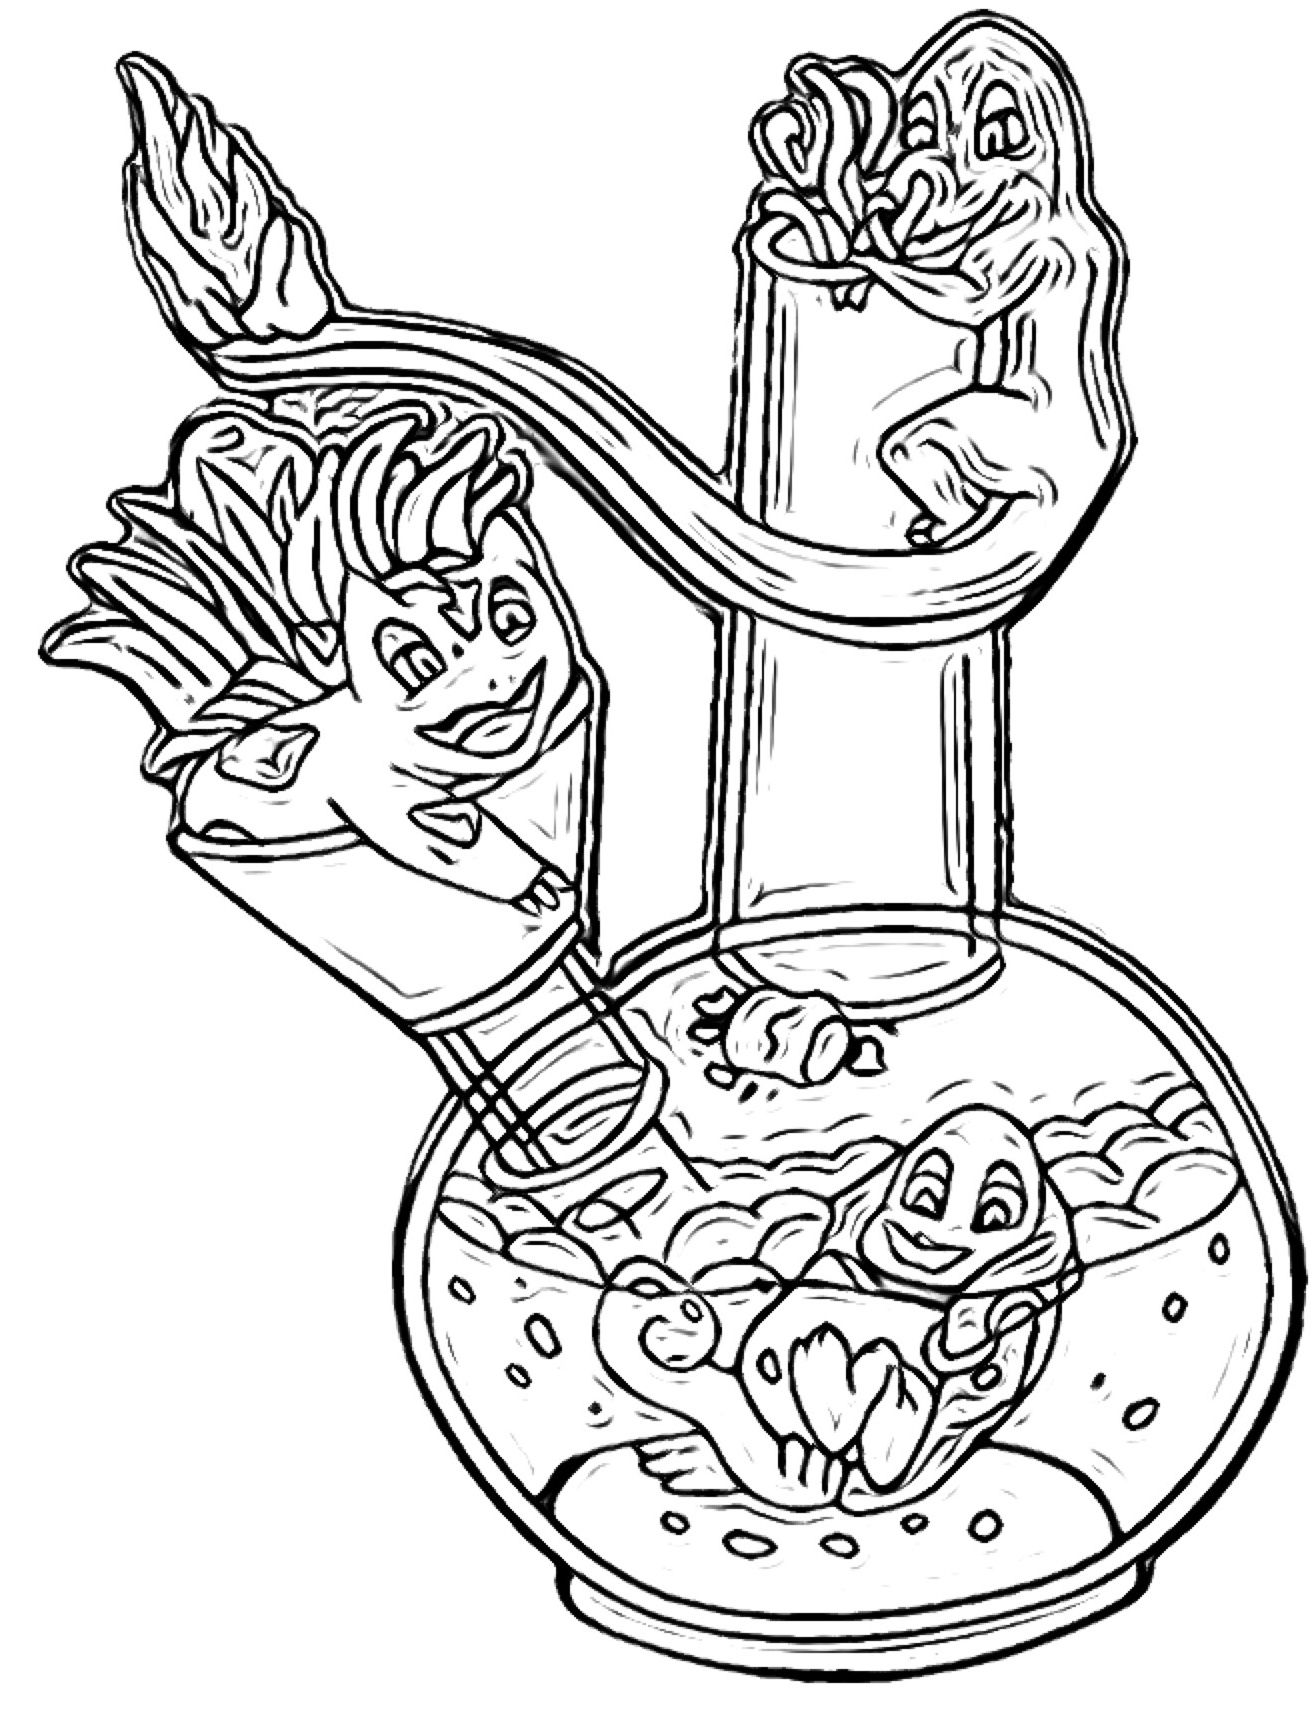 Stoner Coloring Pages